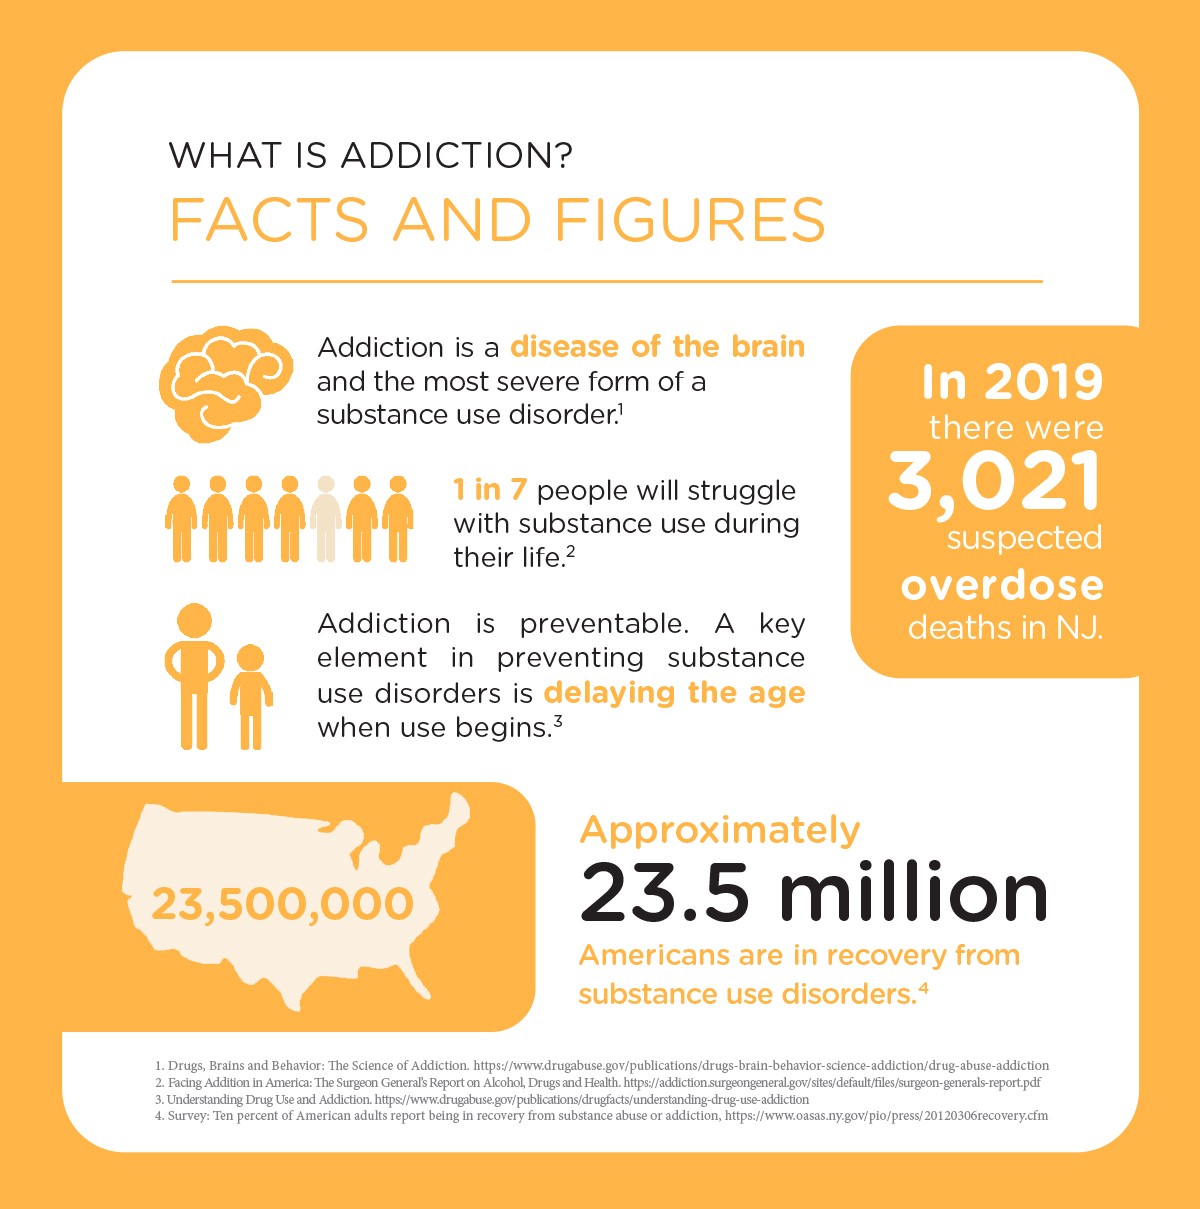 Addiction facts and figures